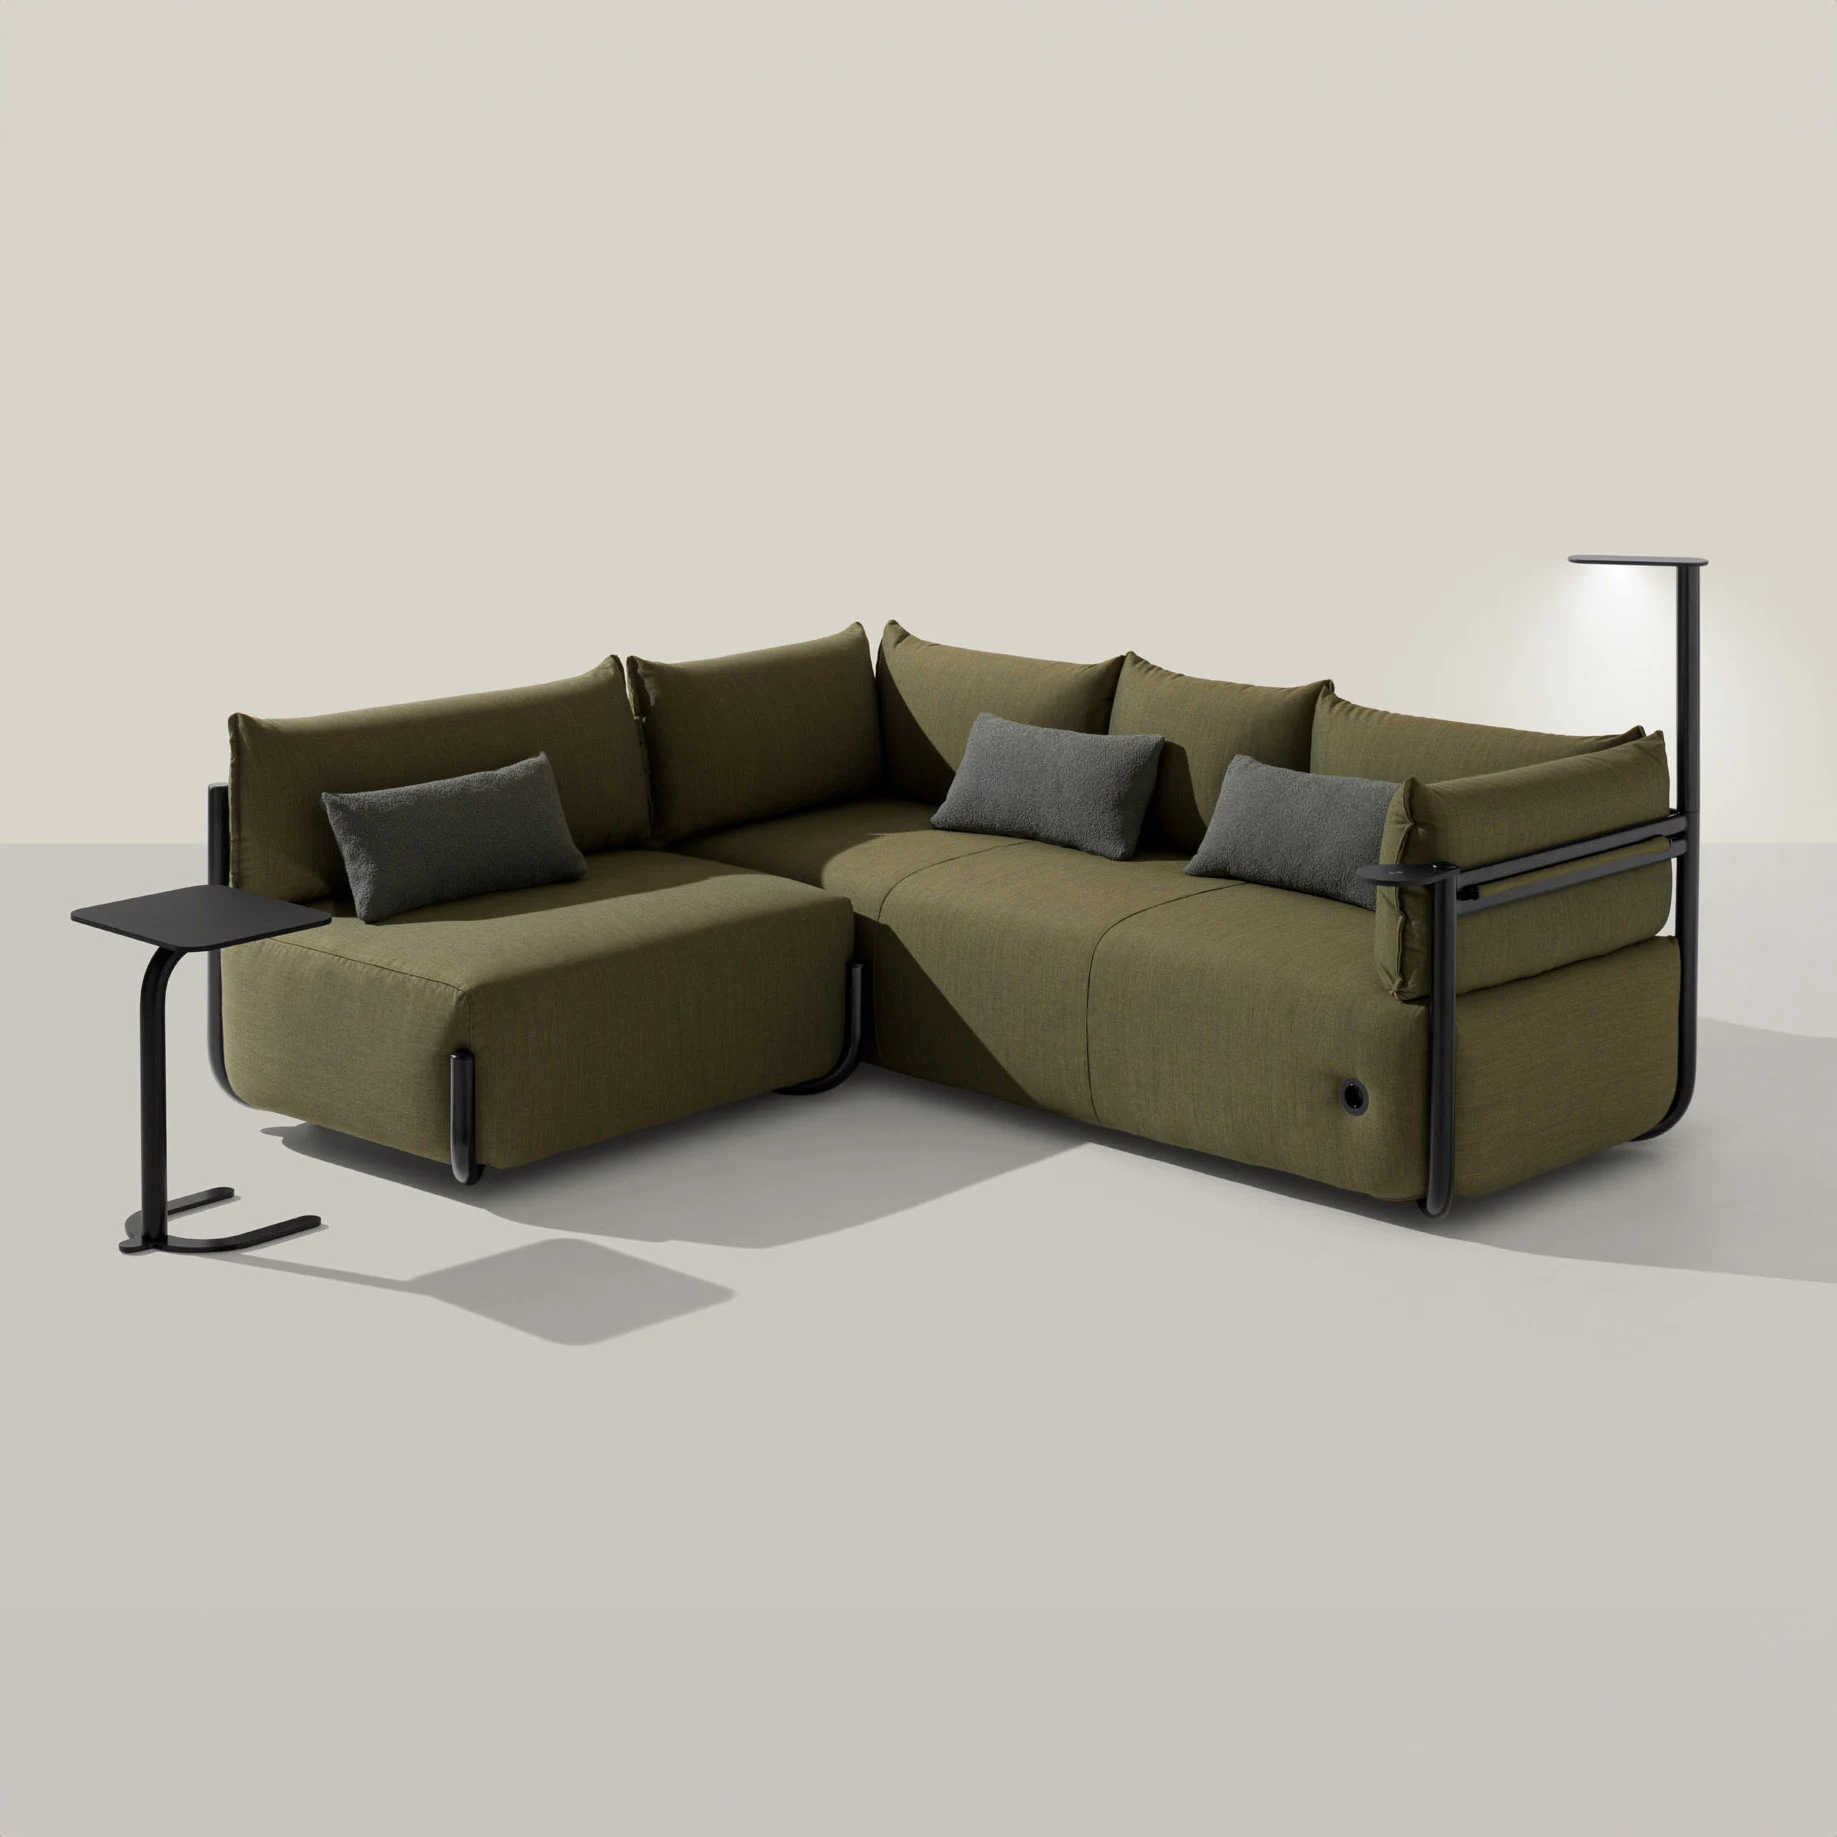 COSMO-ETAL-sofa-system-15021-1505-1515-with-reading-lamp-Accessories